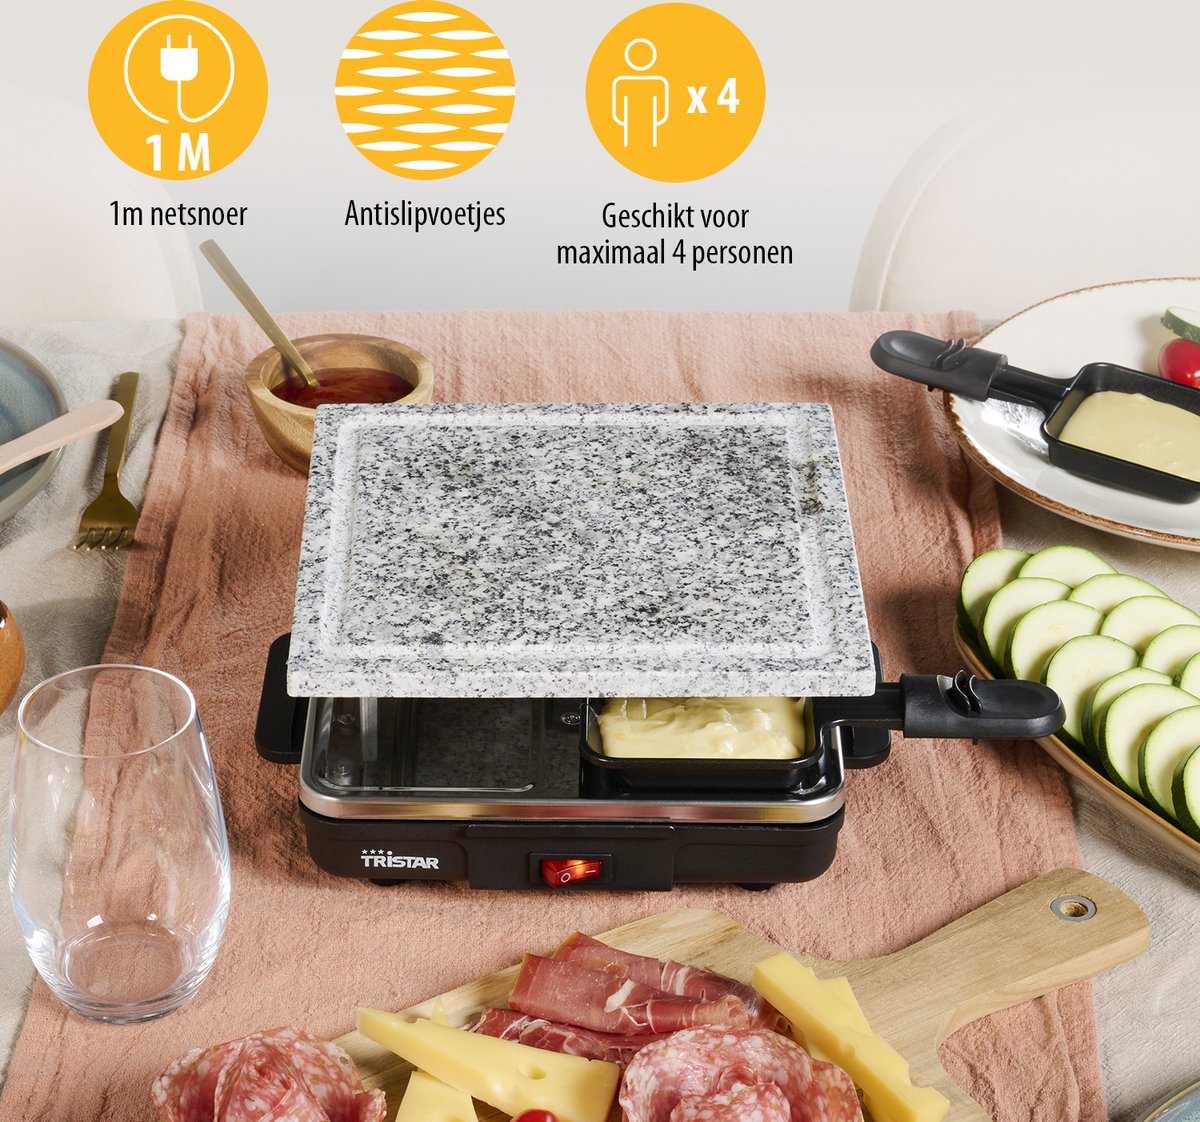 Raclette 4 personas Tristar